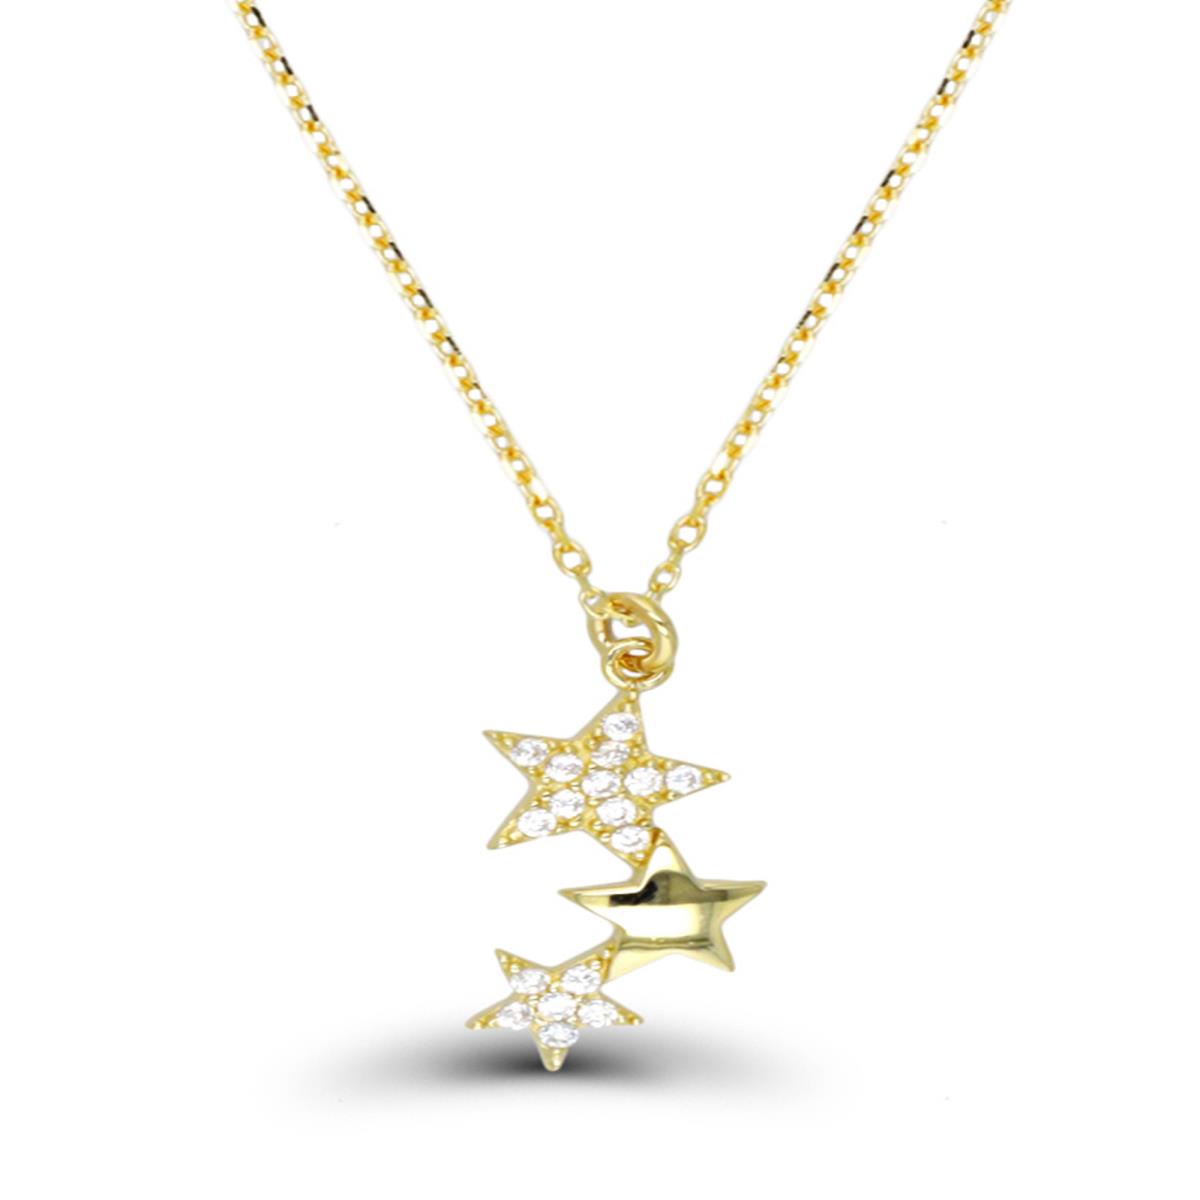 10K Yellow Gold Triple Star 16"+2" Necklace